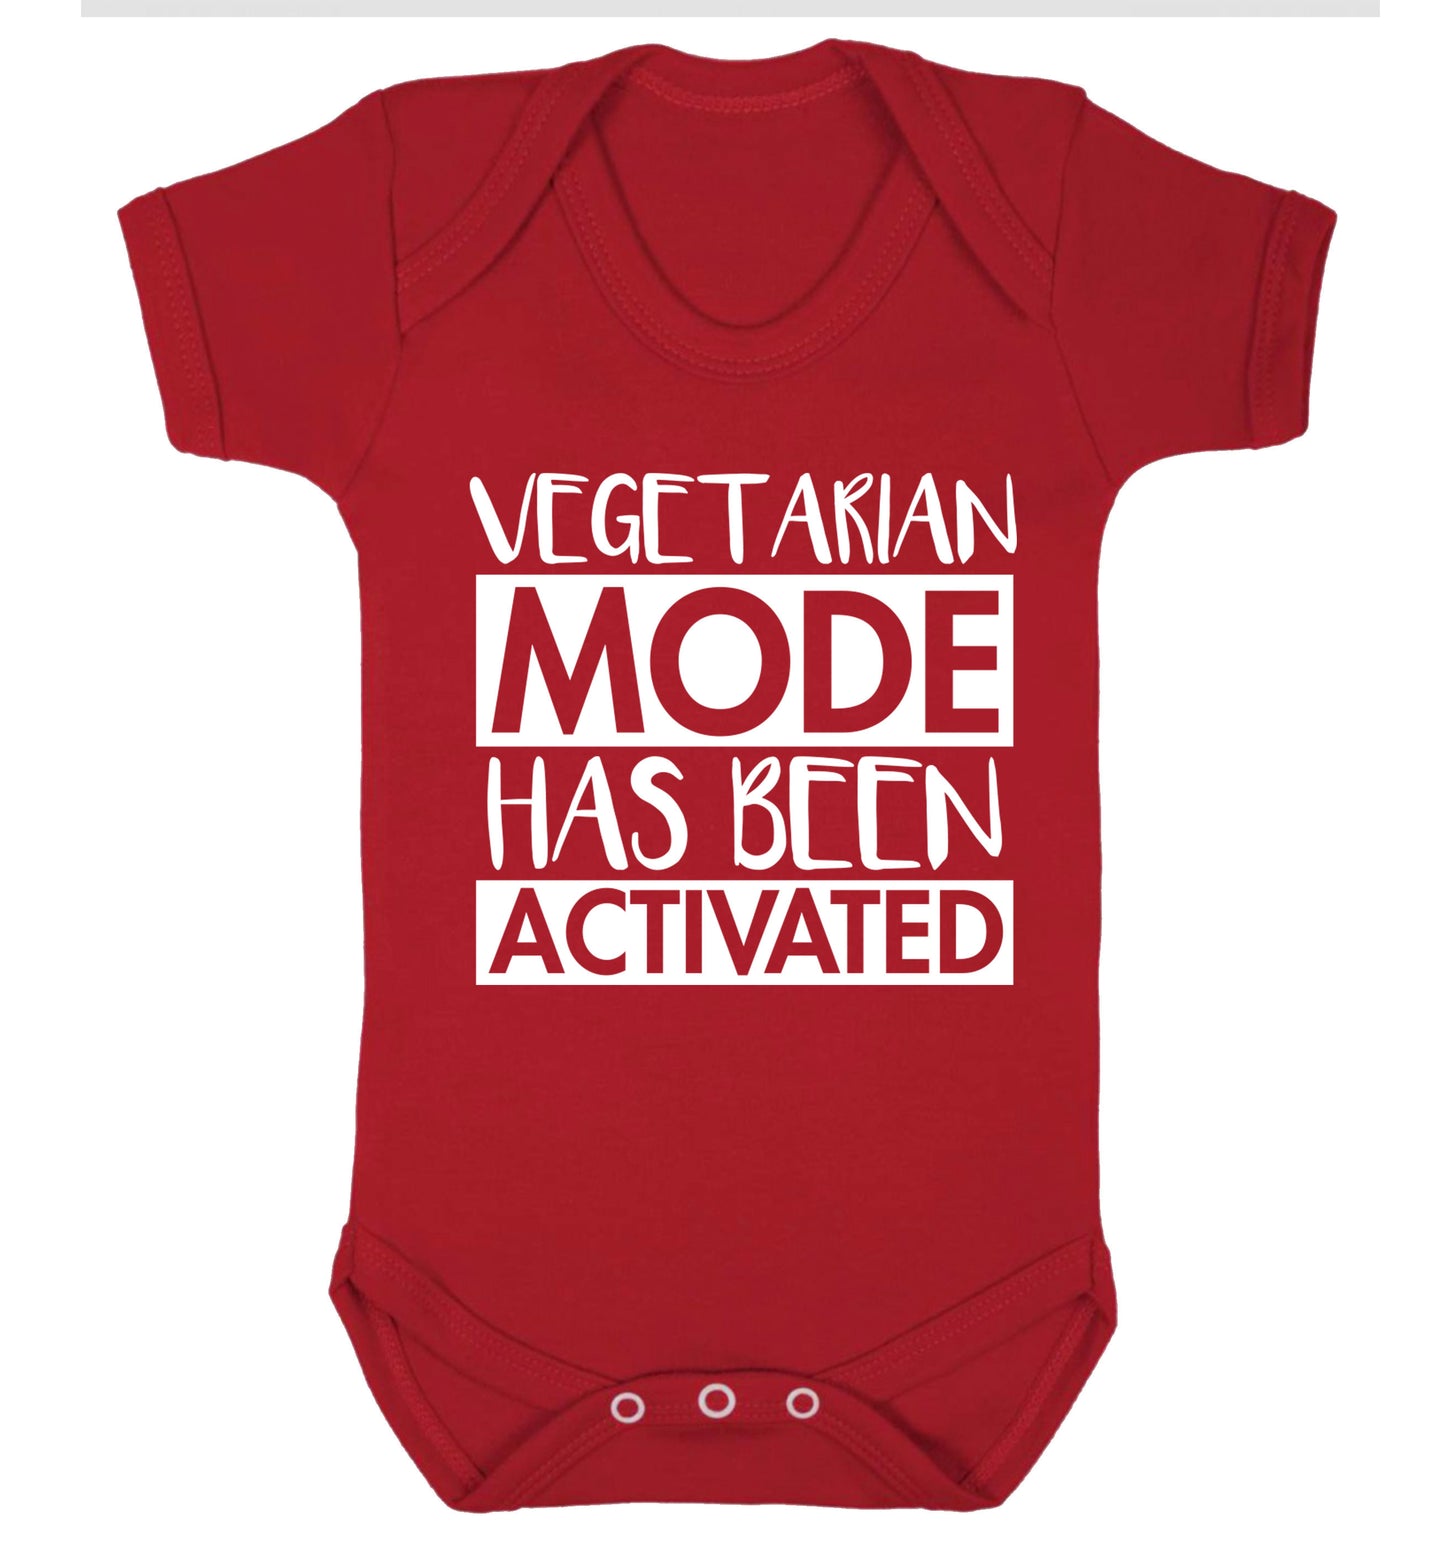 Vegetarian mode activated Baby Vest red 18-24 months